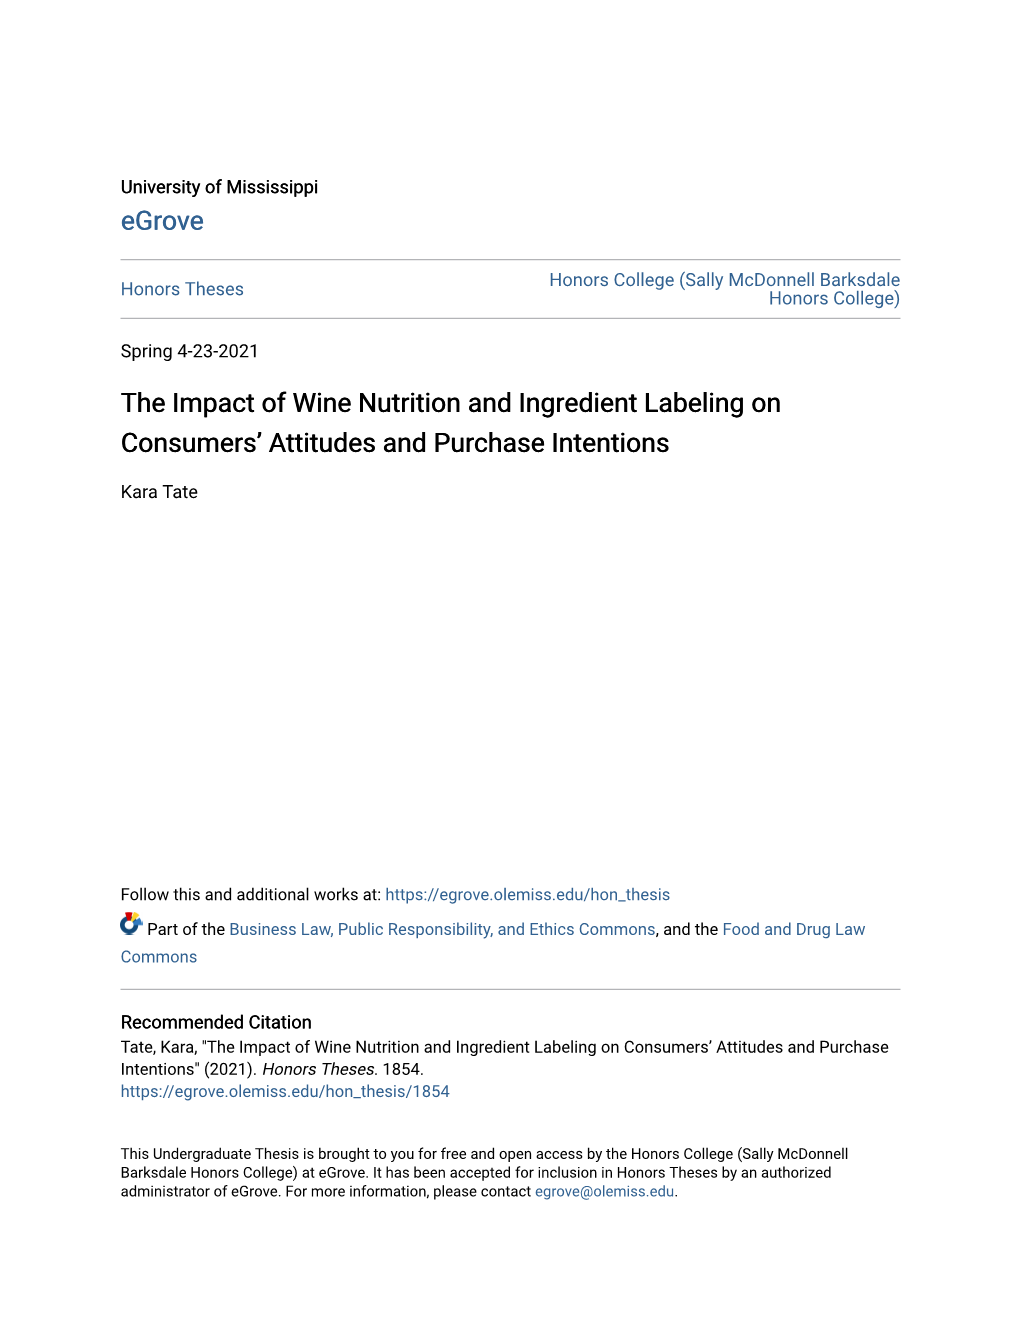 The Impact of Wine Nutrition and Ingredient Labeling on Consumers’ Attitudes and Purchase Intentions